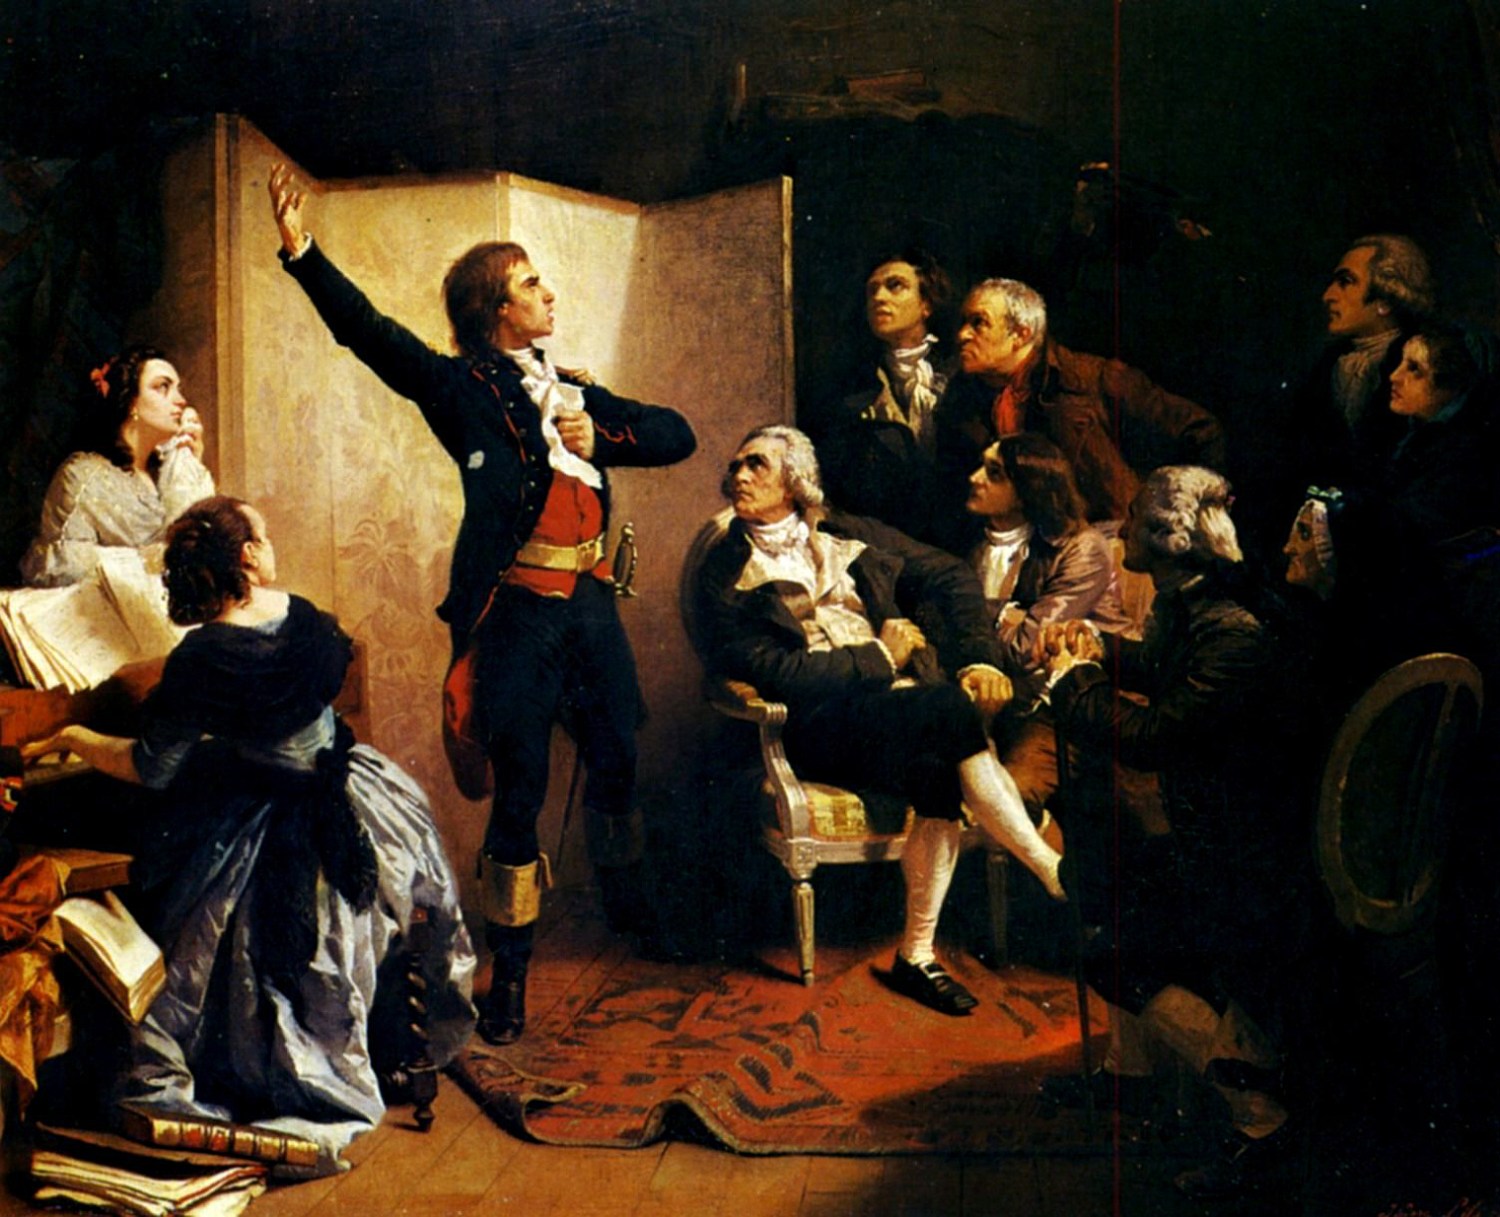 A painting by Isidore Pils depicting Rouget de Lisle singing "La Marseillaise"